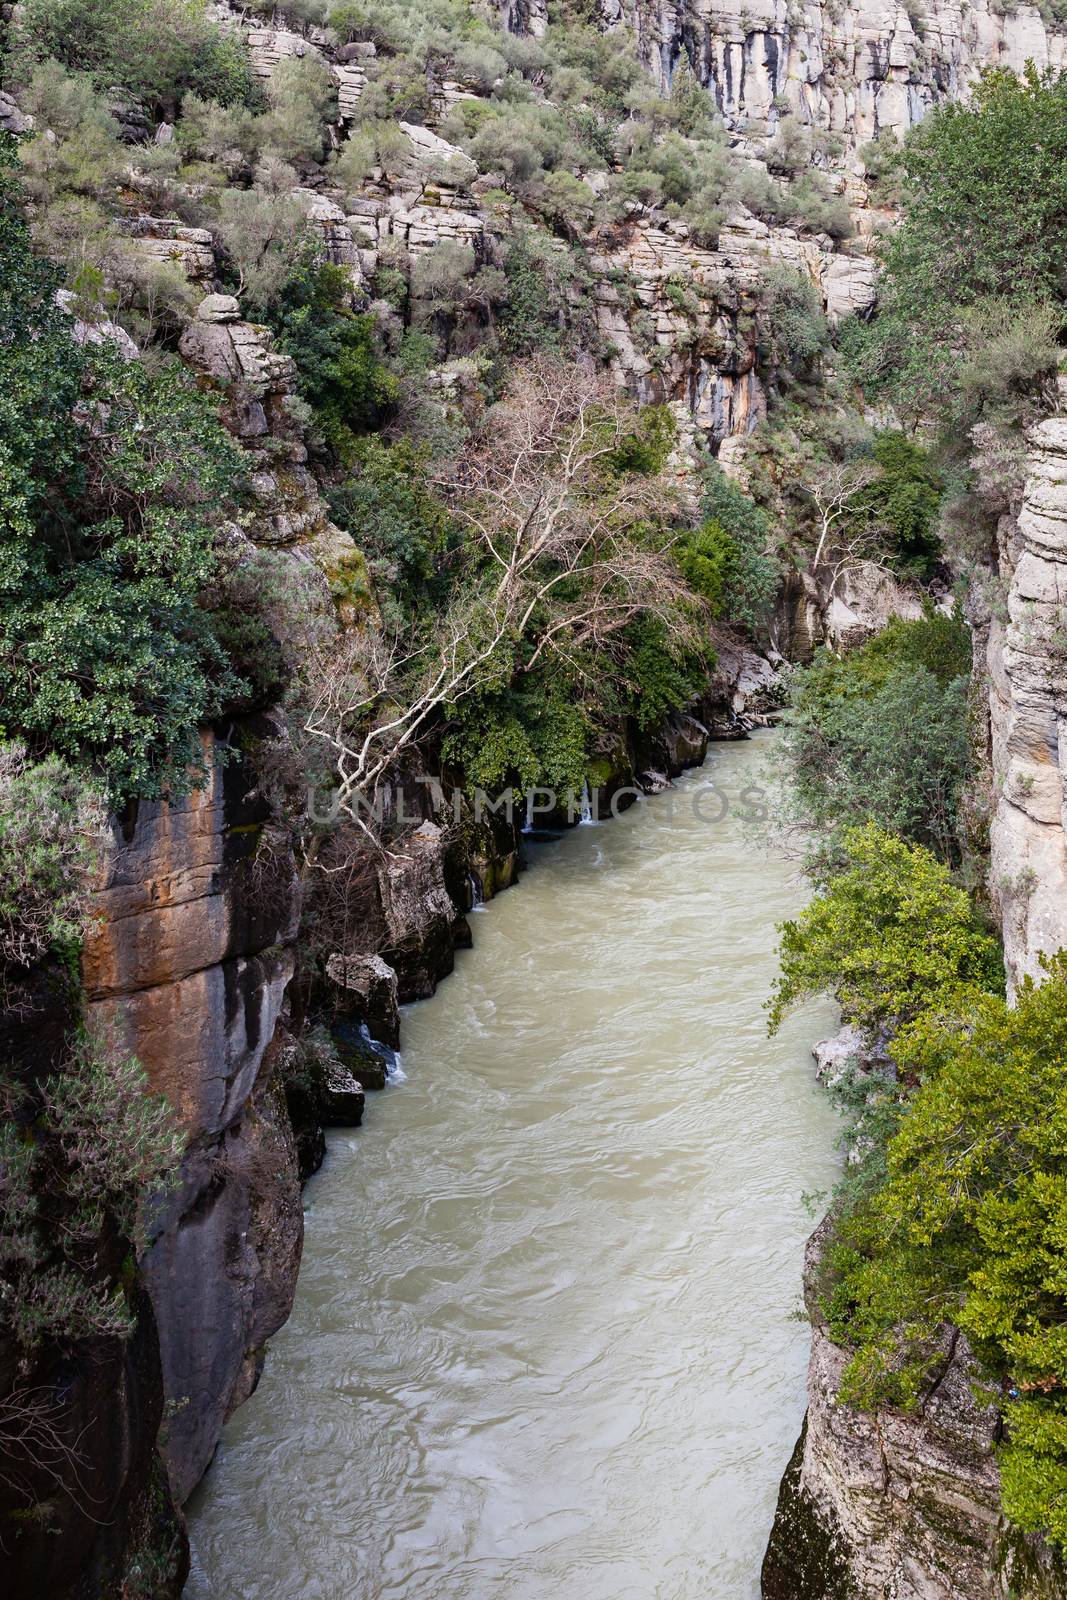 A view of Kopru River and Koprulu Canyon is a National Park in the province of Antalya, south western Turkey.